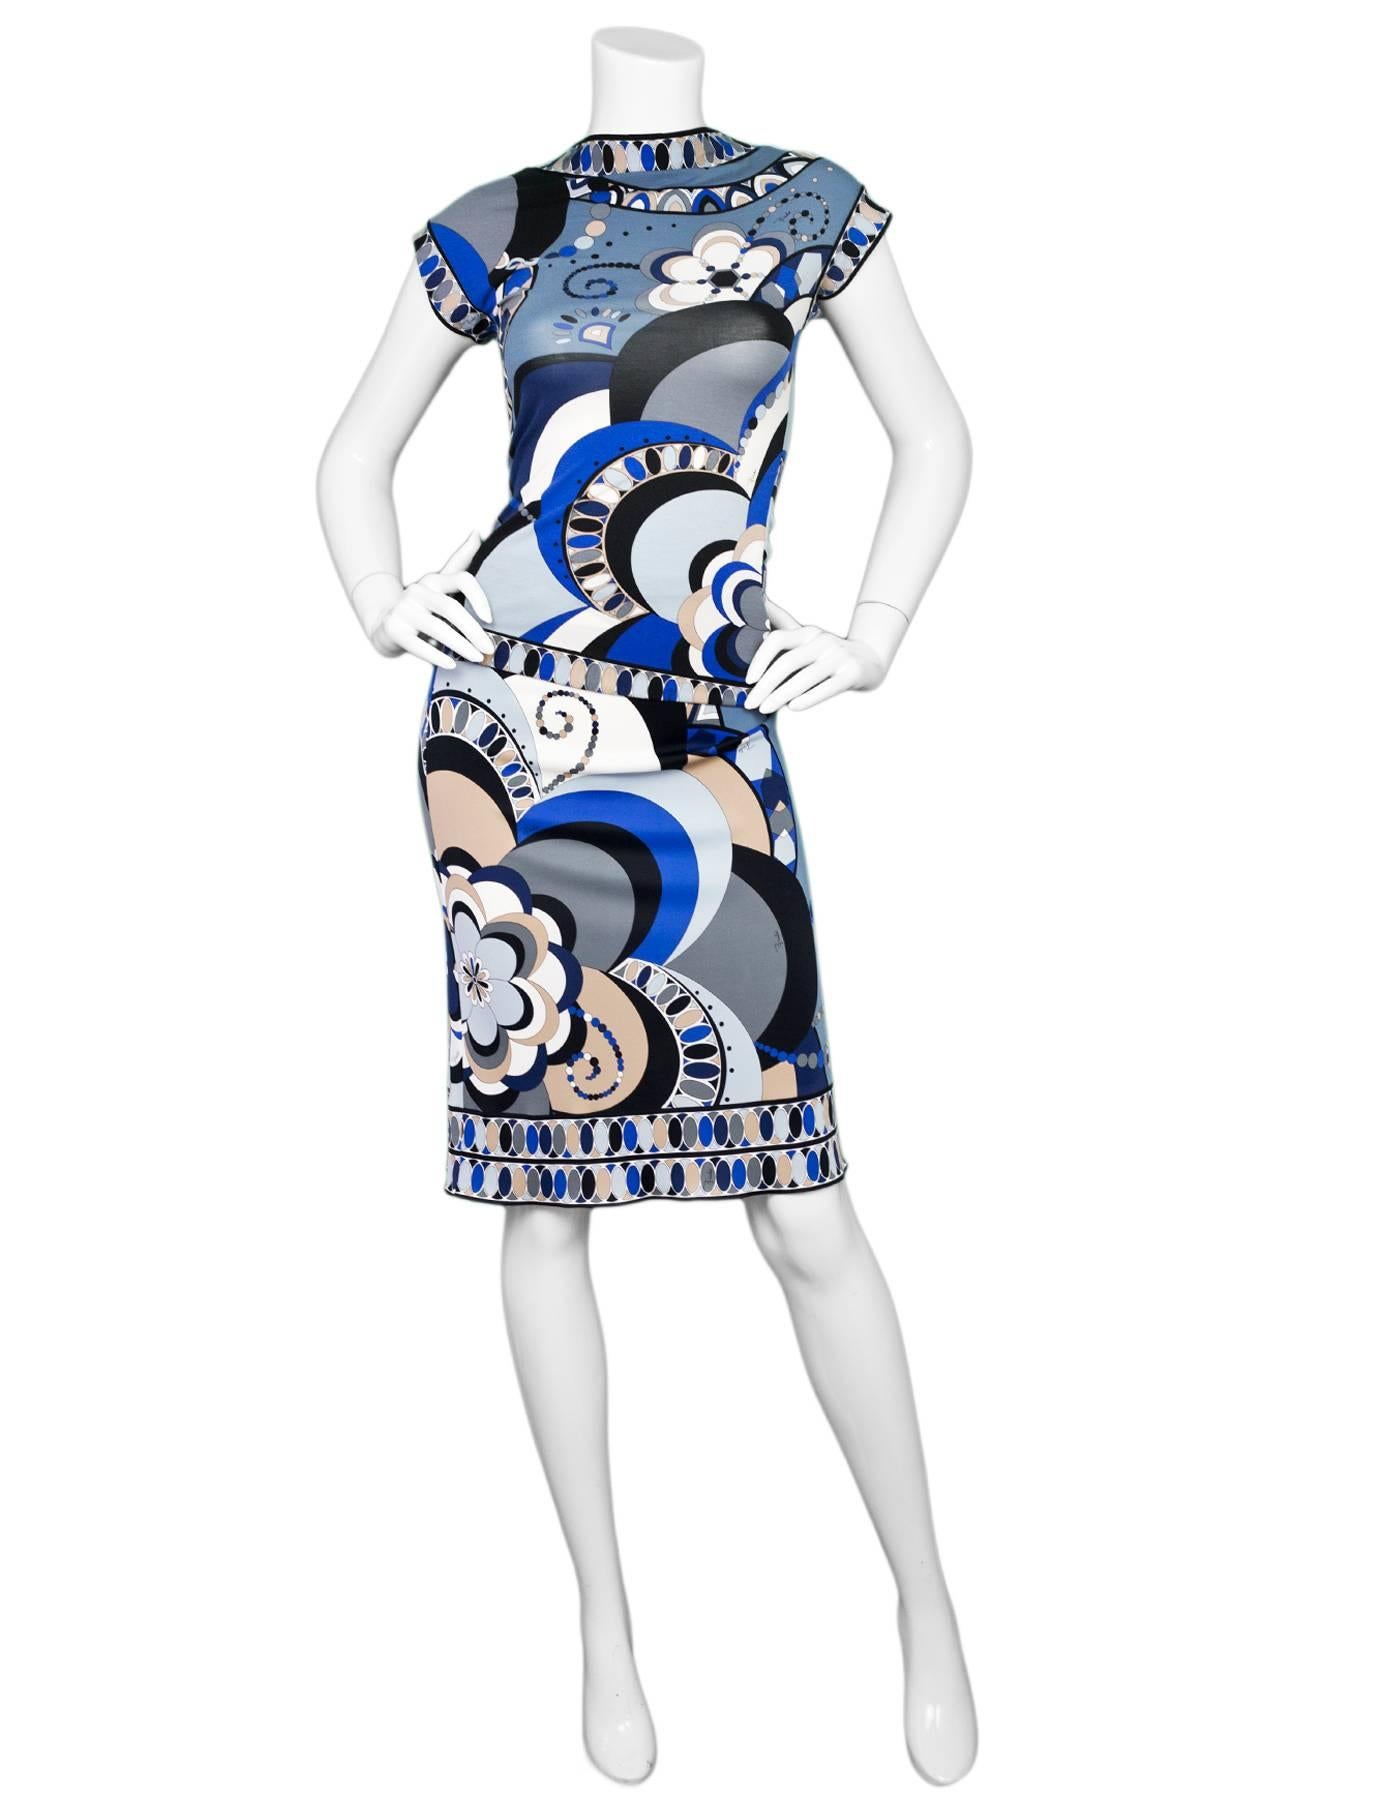 Emilio Pucci Blue, Black & Grey Skirt Sz 4

Made In: Italy
Color: Blue, black, grey
Composition: 100% Rayon
Lining: None
Closure/Opening: Stretch wasitband
Overall Condition: Excellent pre-owned condition
Marked Size: US 4
Waist: 27